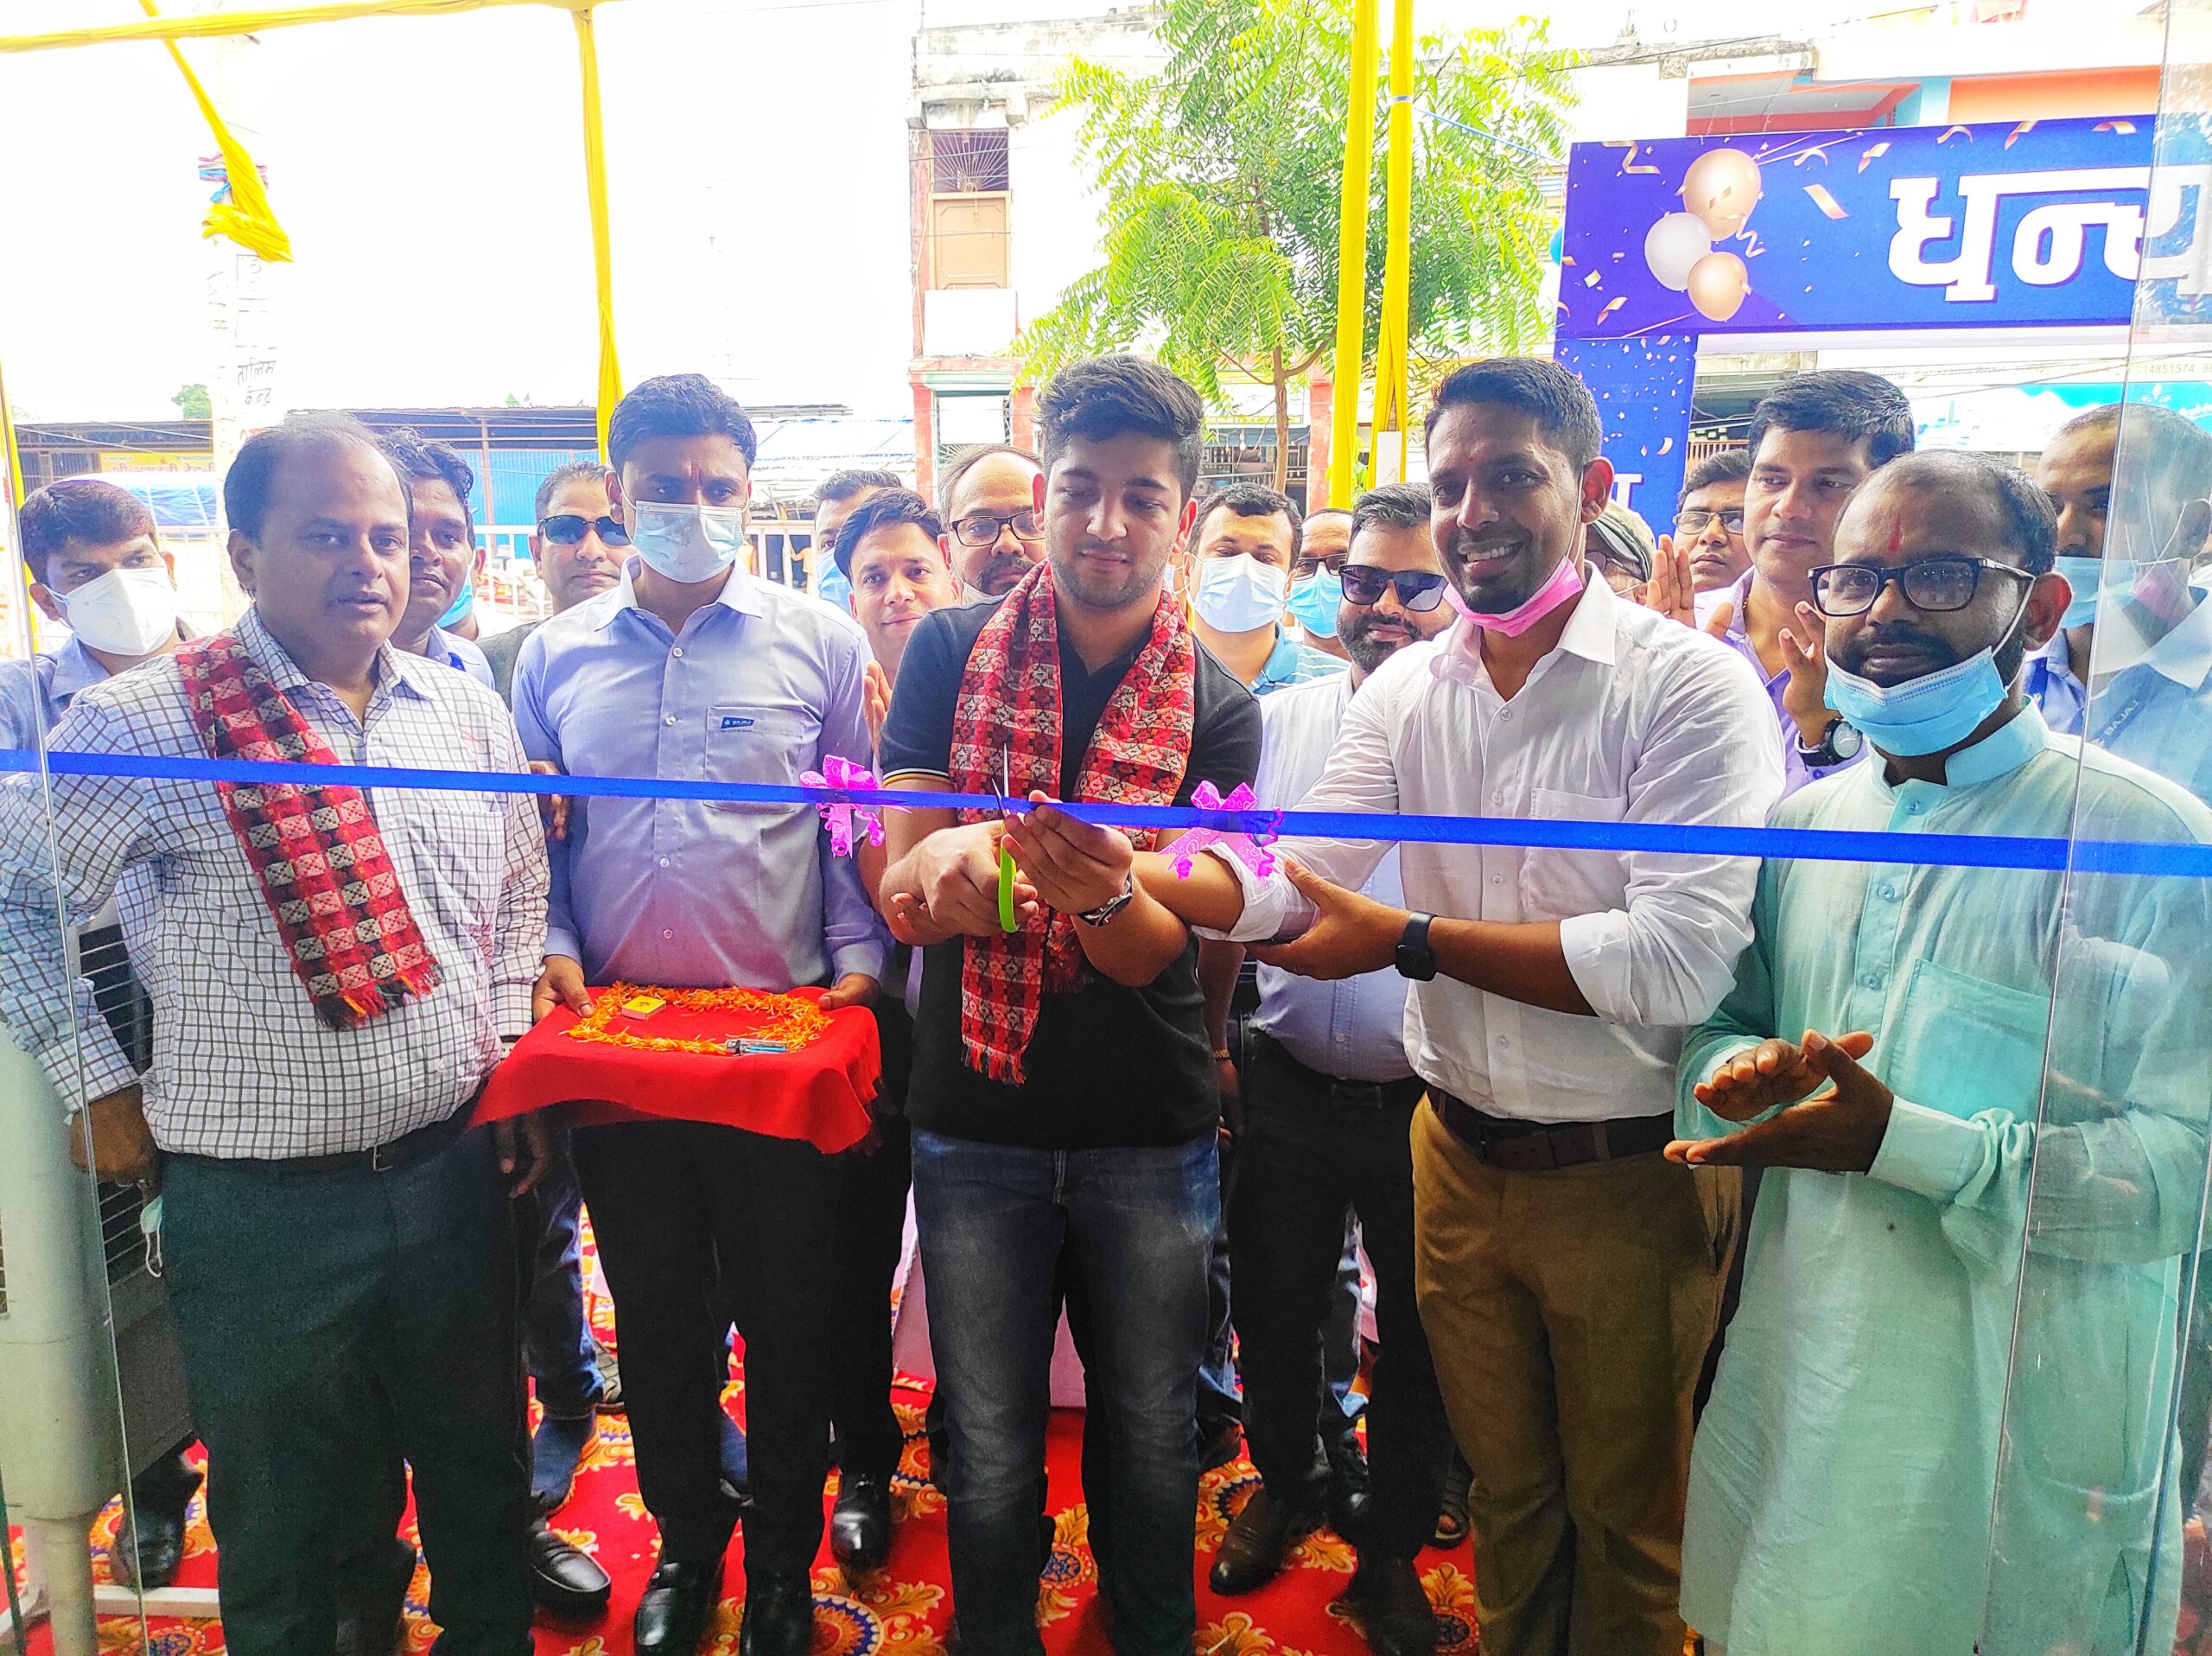 Bajaj’s new showroom in Janakpur, sales, service and spares will be available